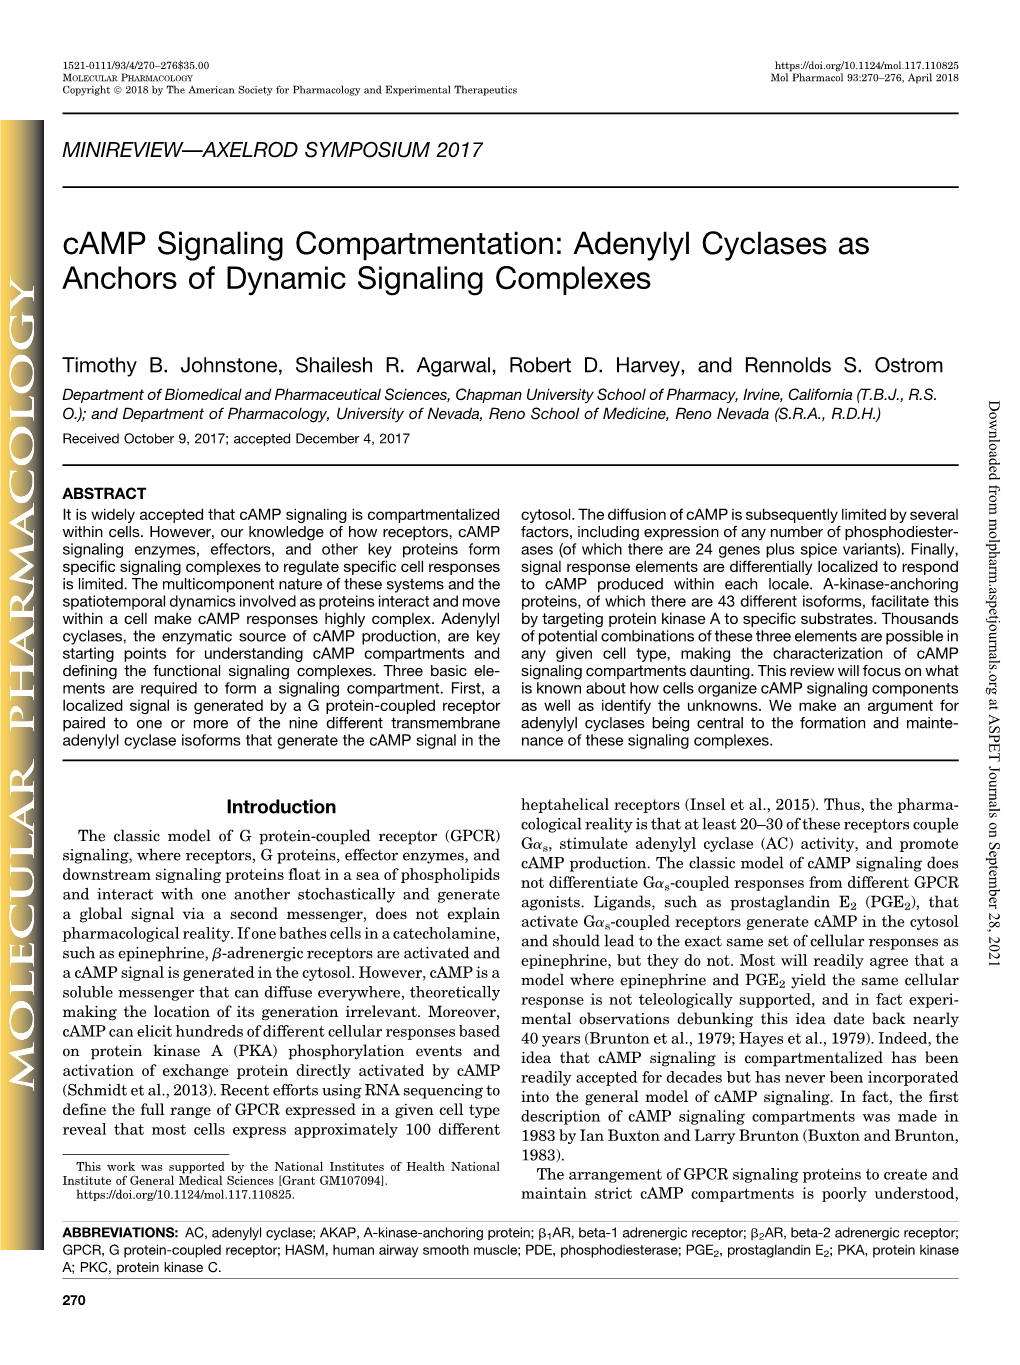 Adenylyl Cyclases As Anchors of Dynamic Signaling Complexes